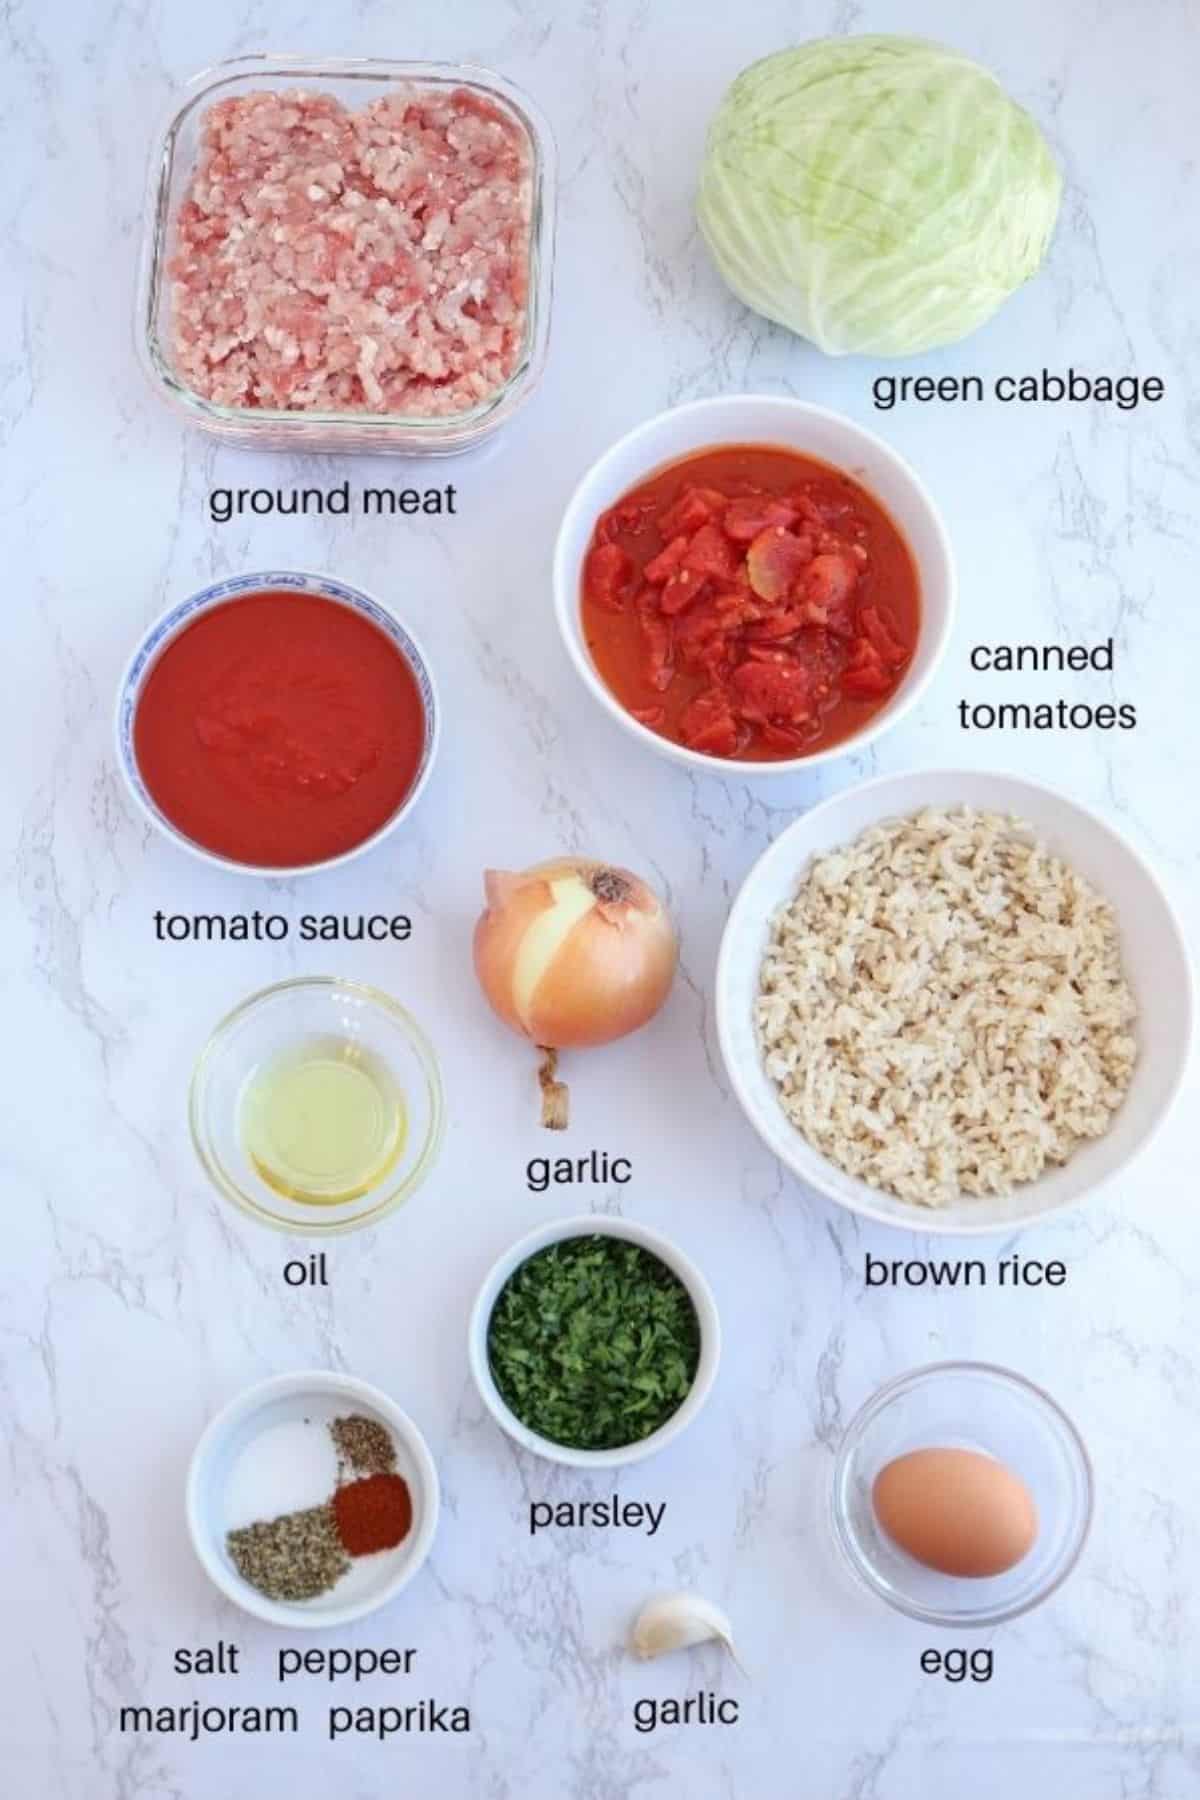 unstuffed polish cabbage rolls ingredients with captions.